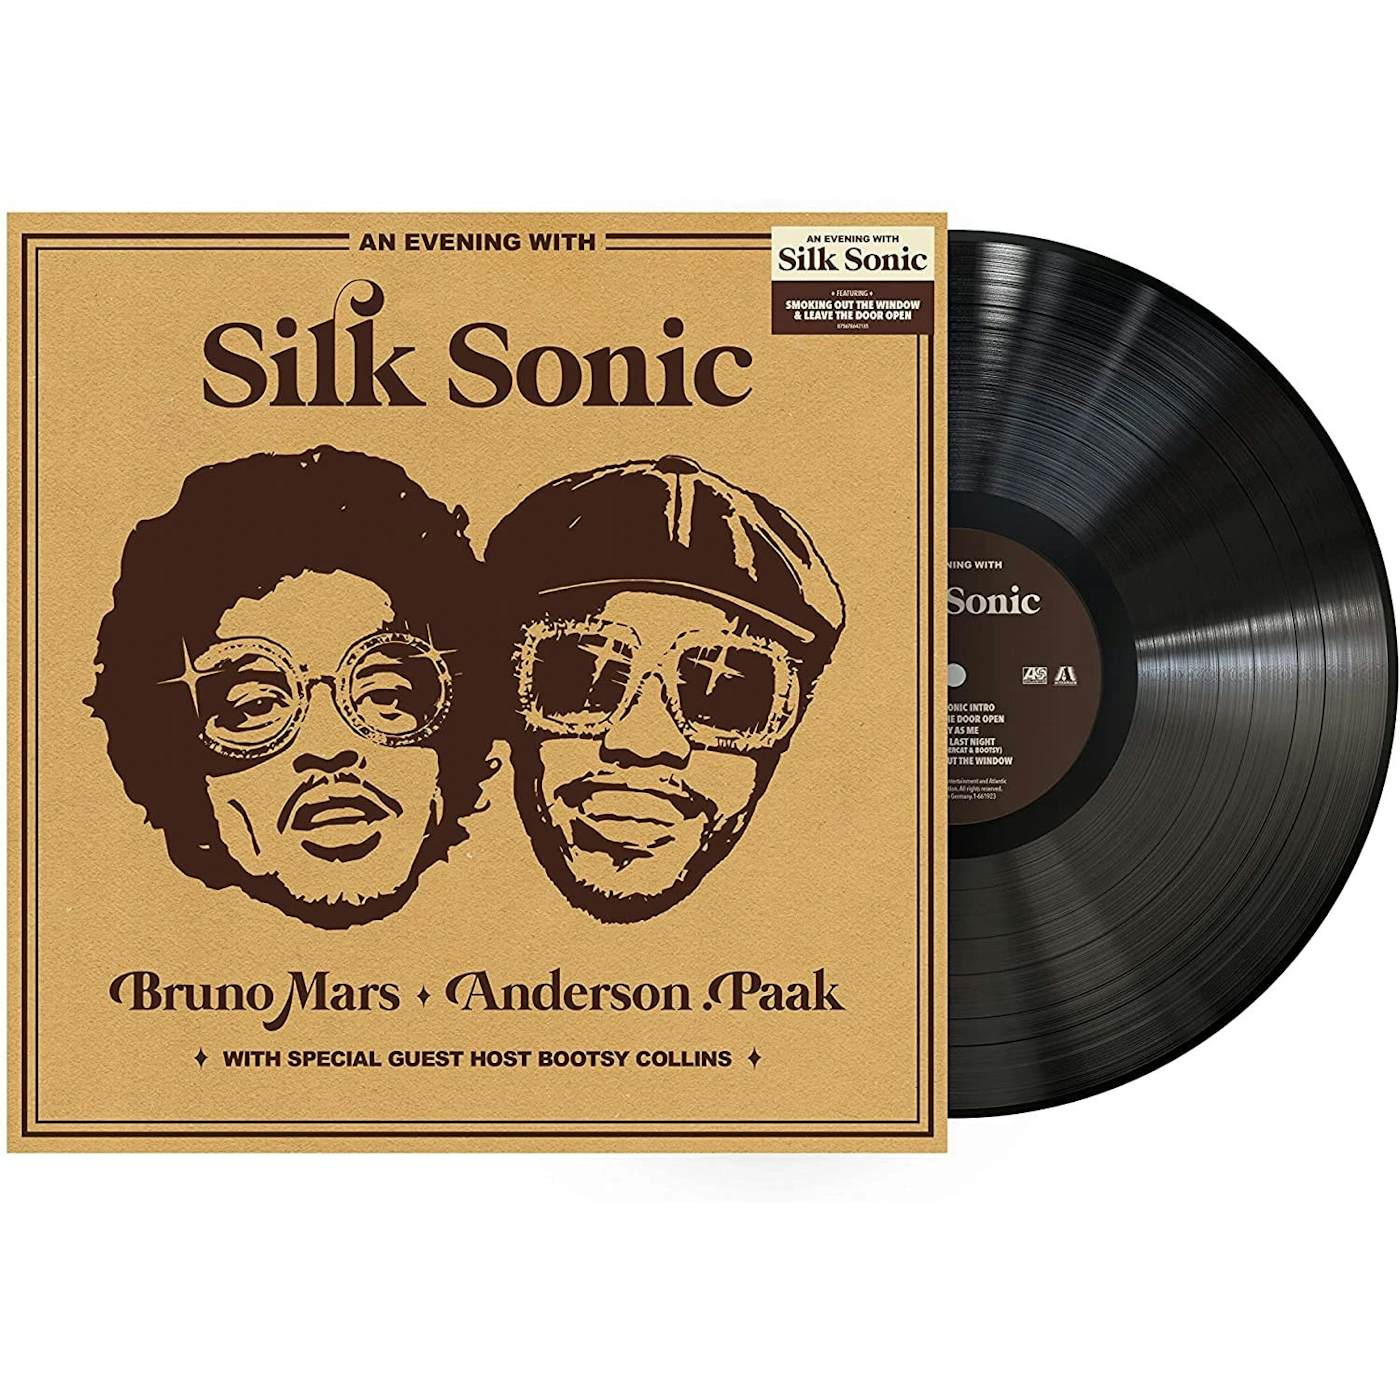 Bruno Mars & Anderson.Paak - An Evening With Silk Sonic